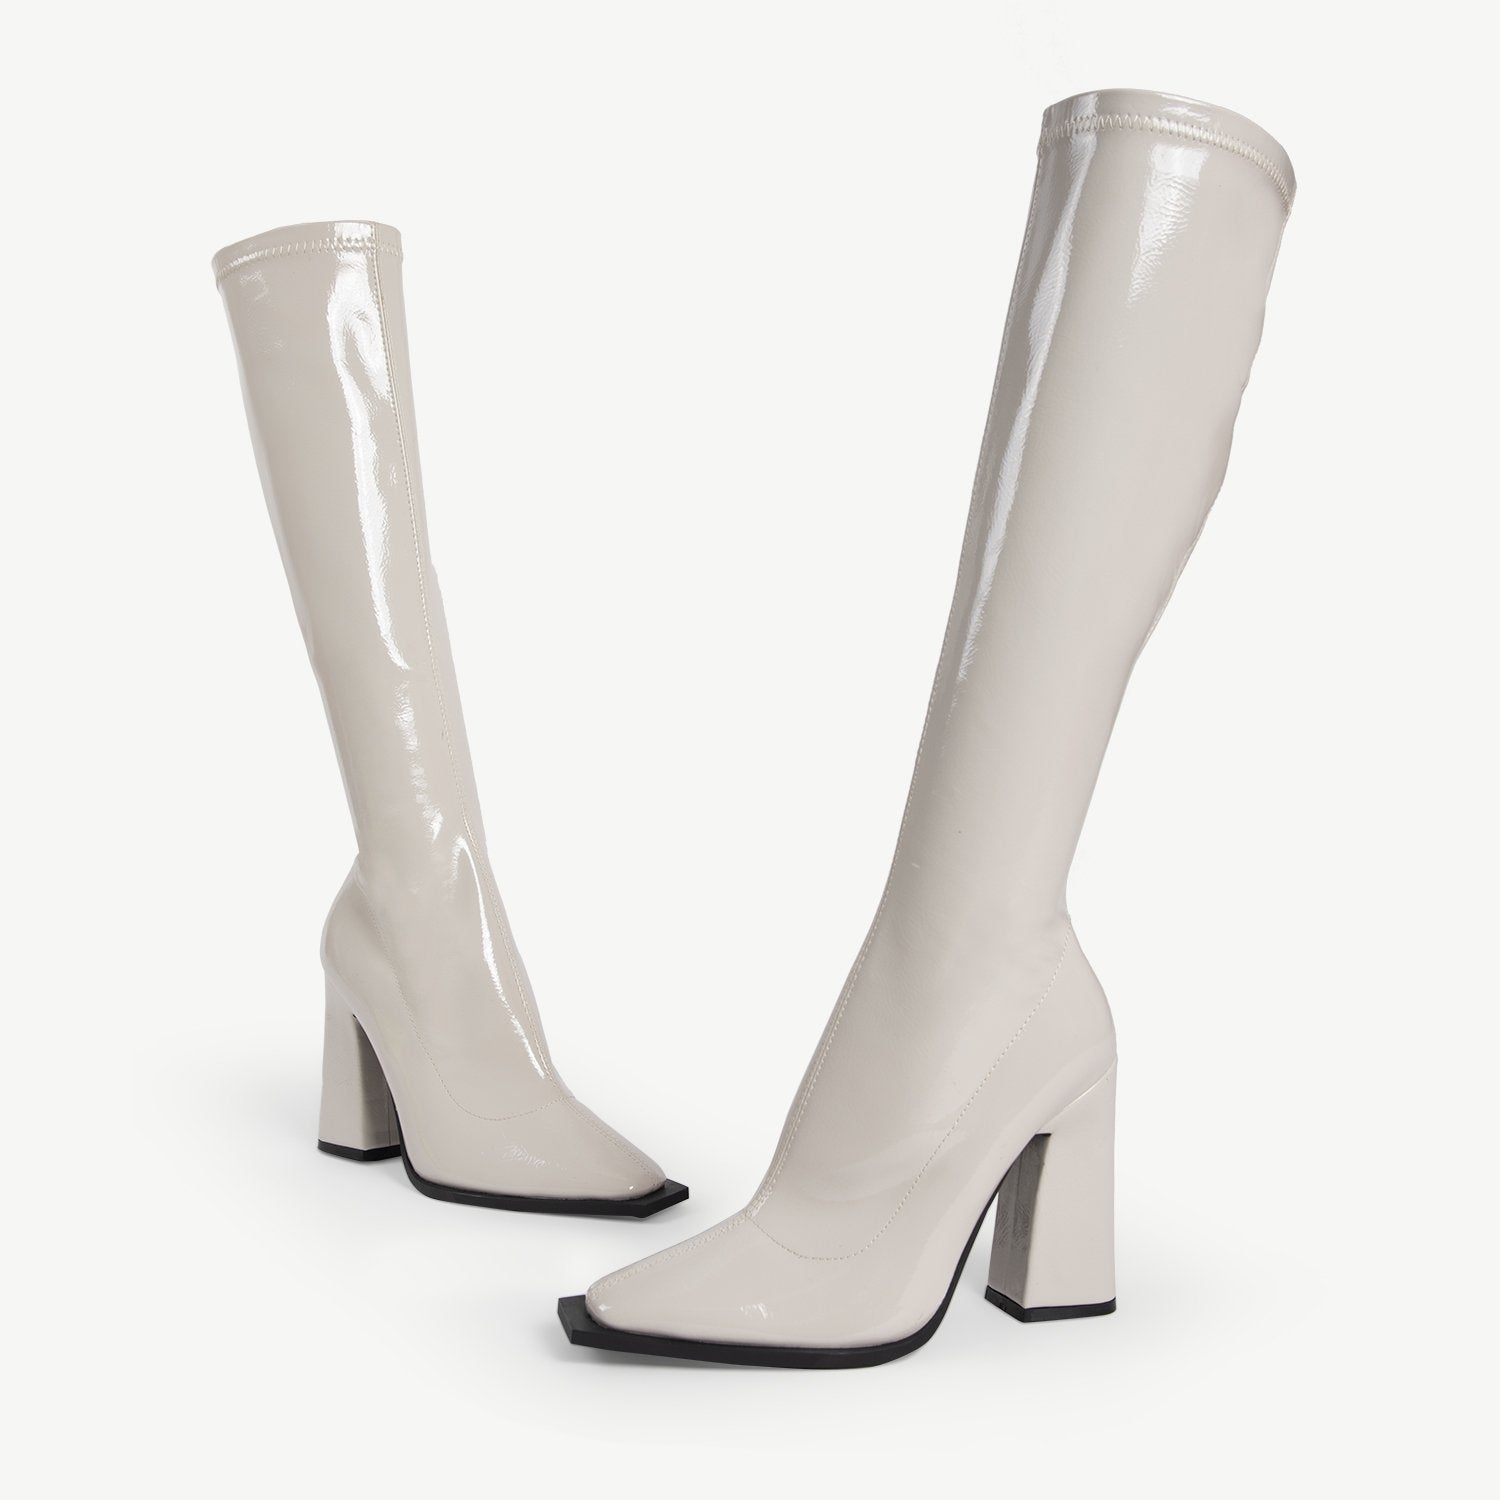 RAID Maxique Block Heeled Boot in Off White